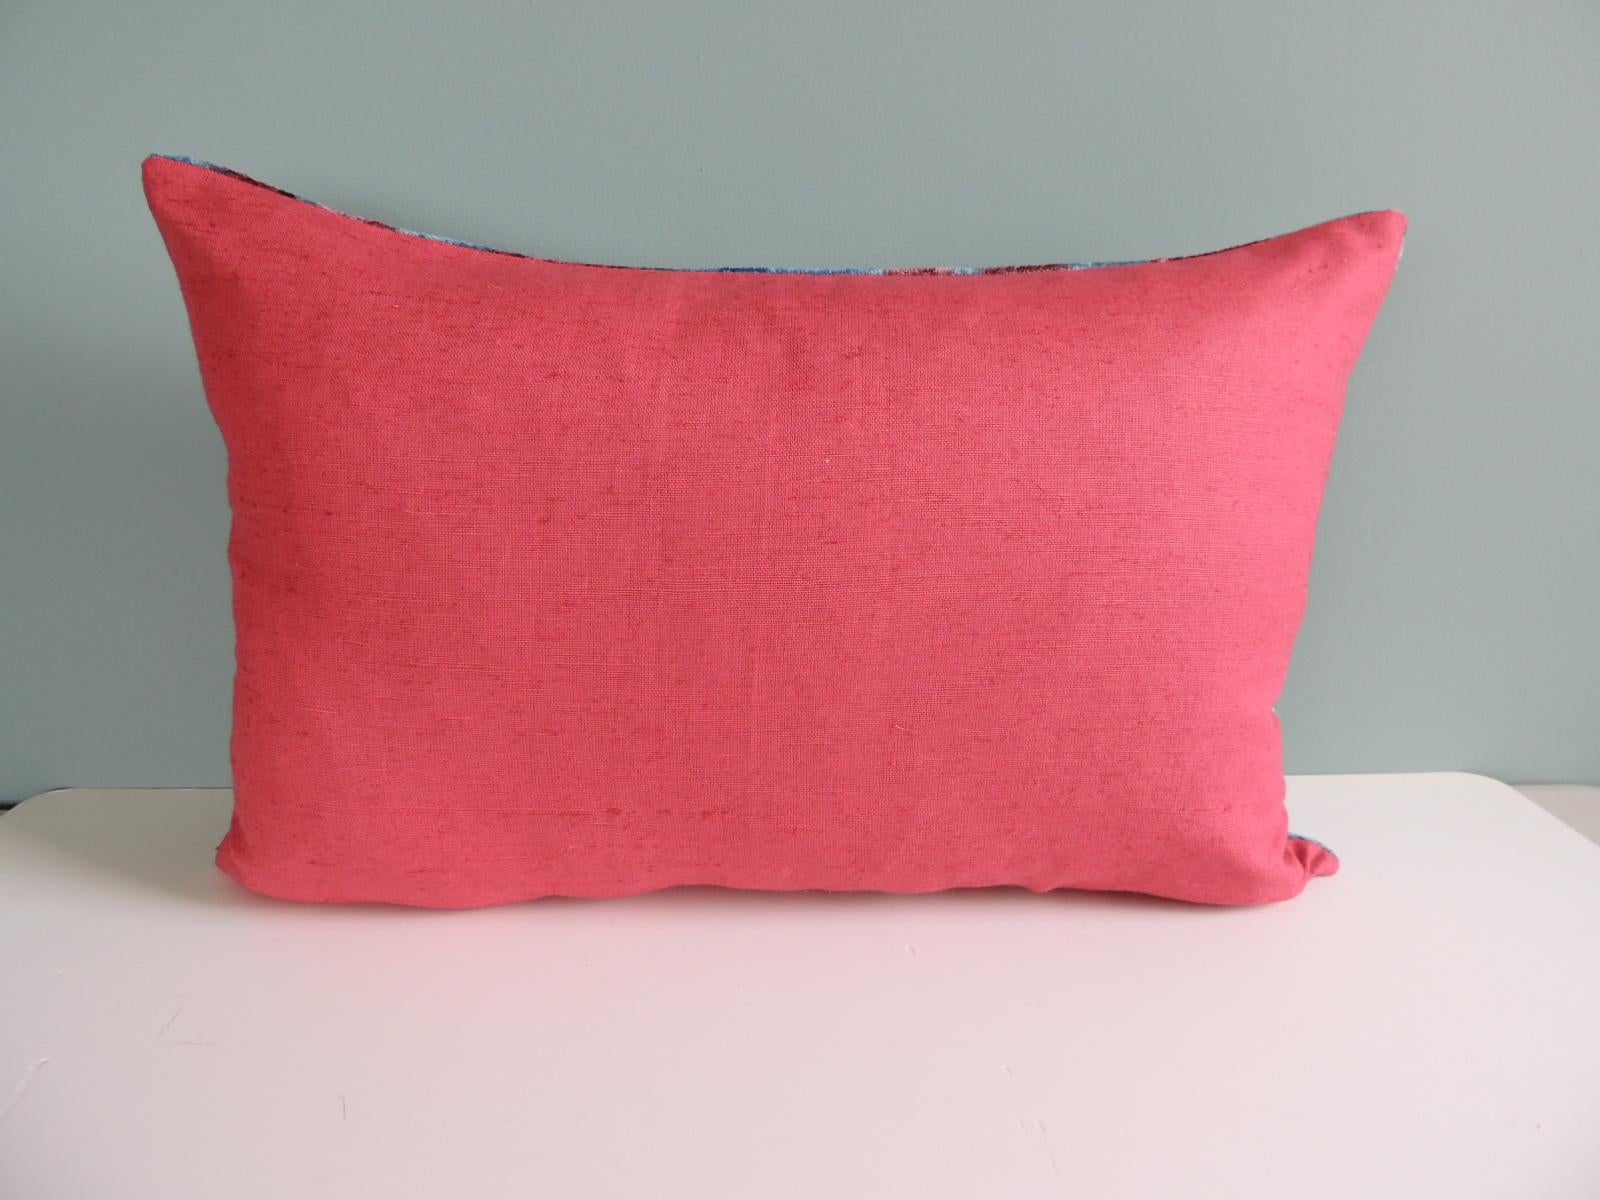 Late 20th Century Ikat Blue and Pink Decorative Bolster Pillow with Hot Pink Linen Backing